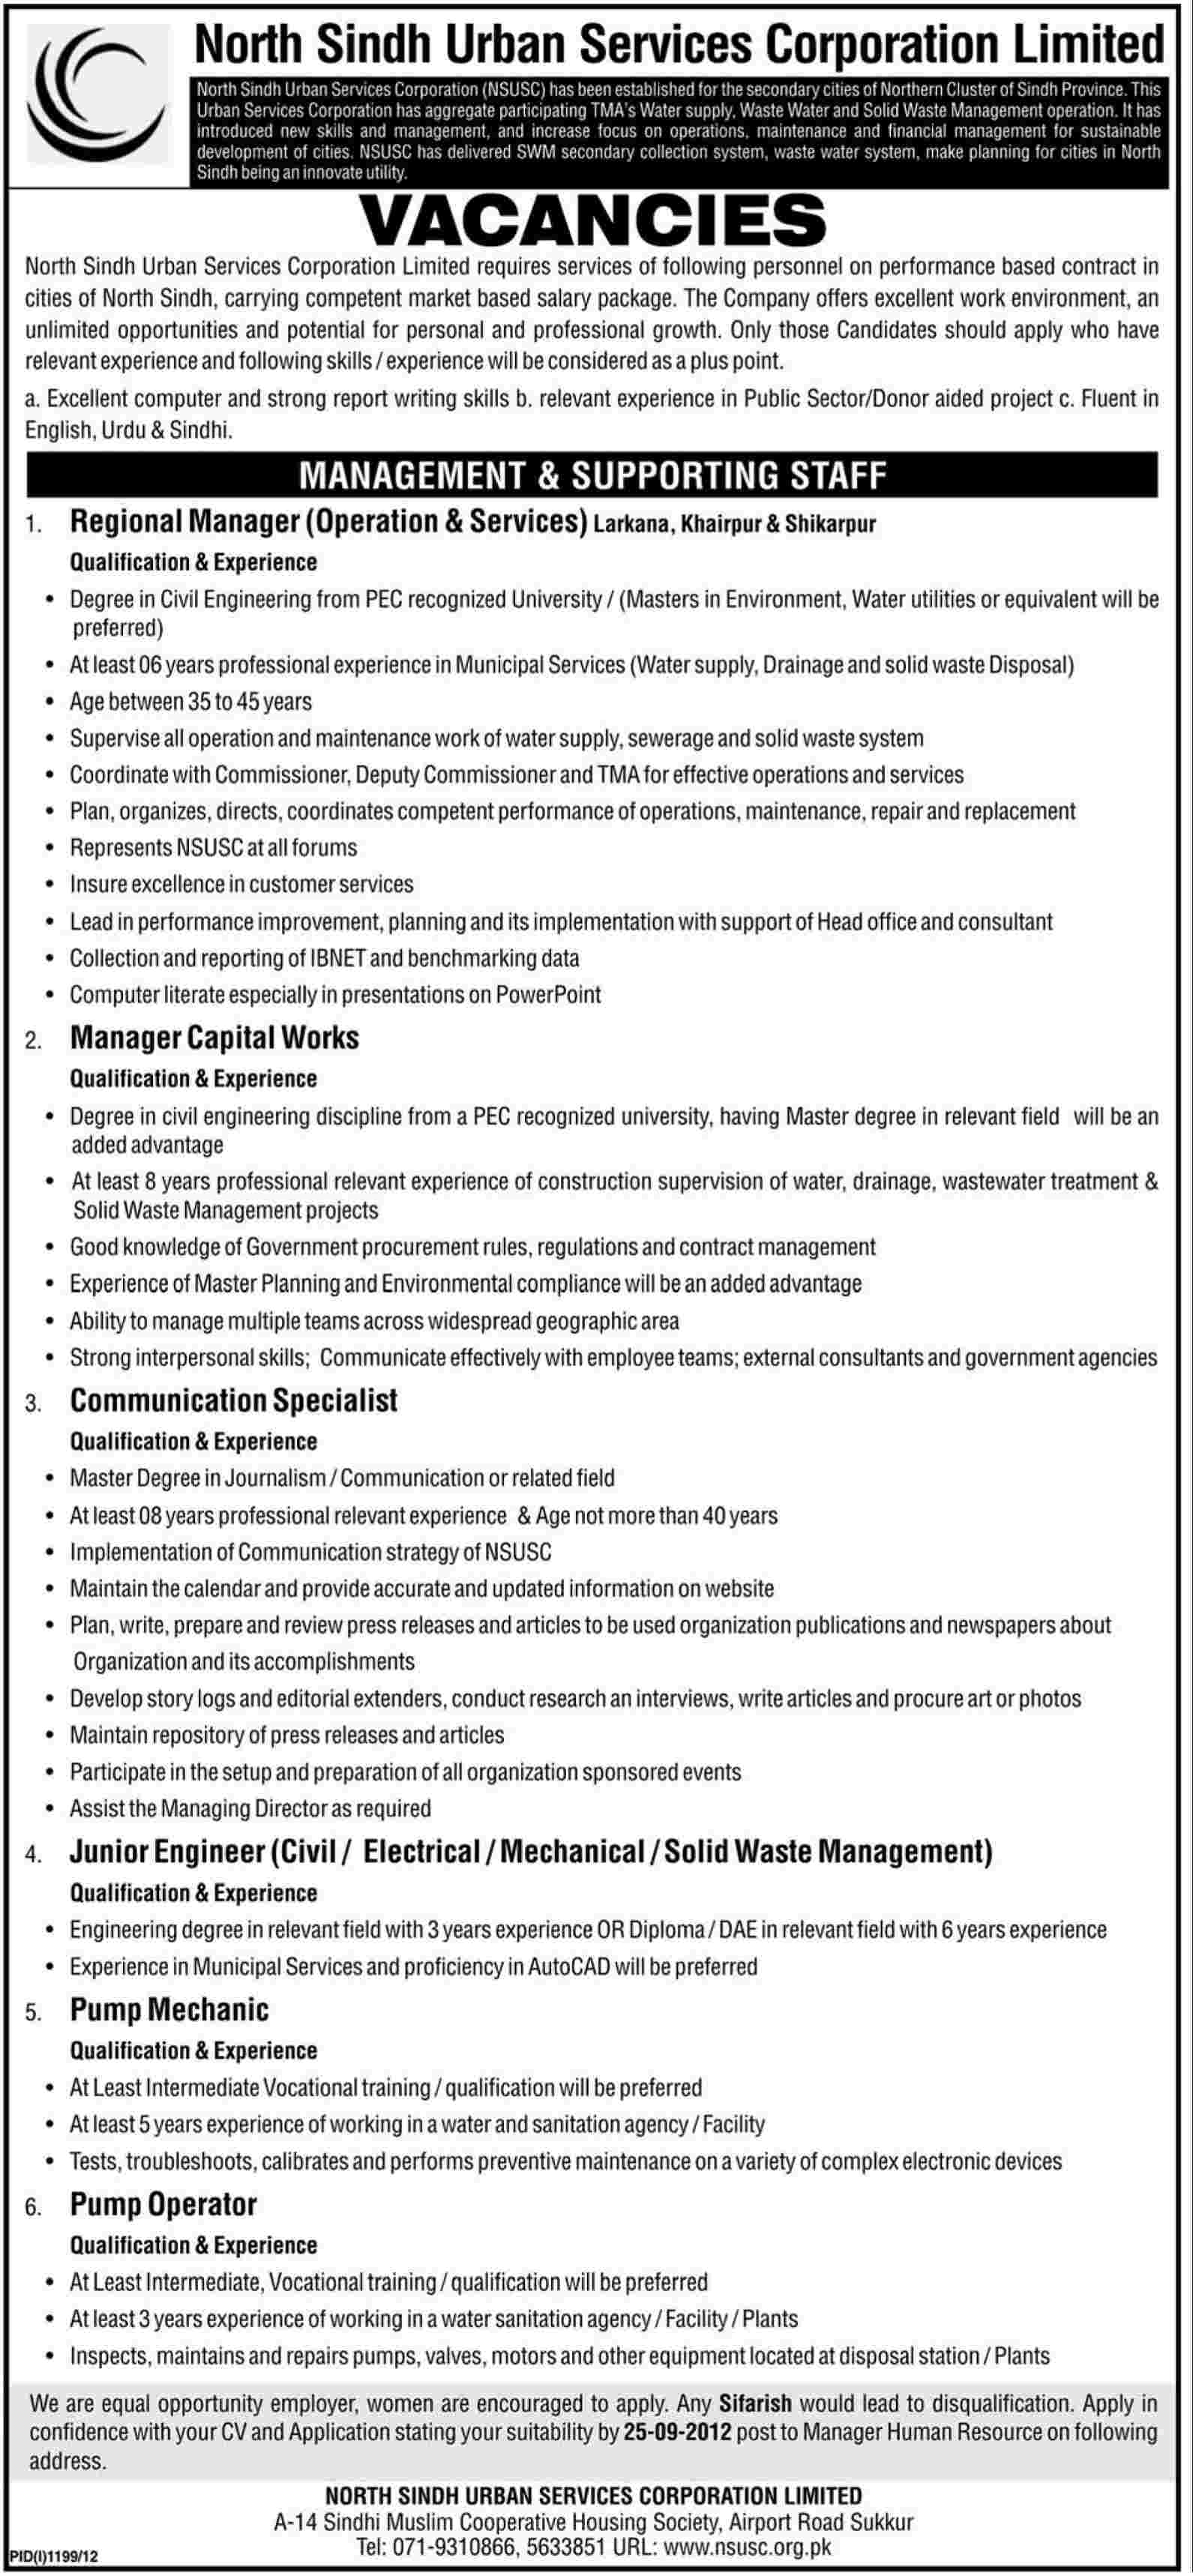 North Sindh Urban Services Corporation Limited Requires Management & Supporting Staff